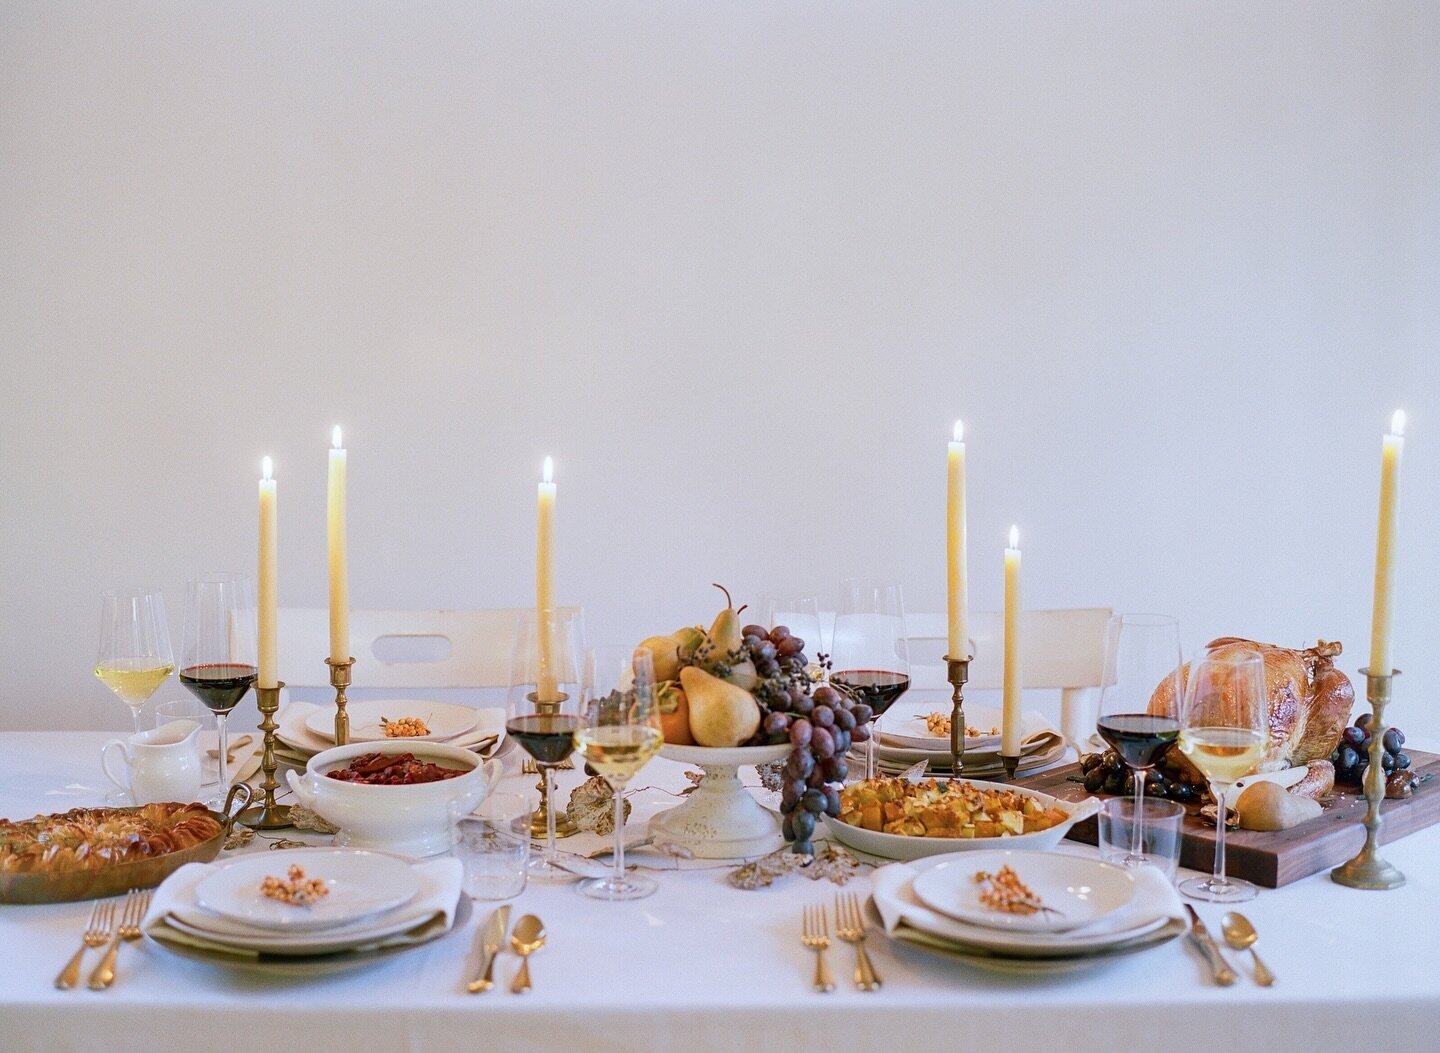 Happy Thanksgiving from our table to yours 🍂

Images captured from a memorable, festive gathering with @cearrcreative